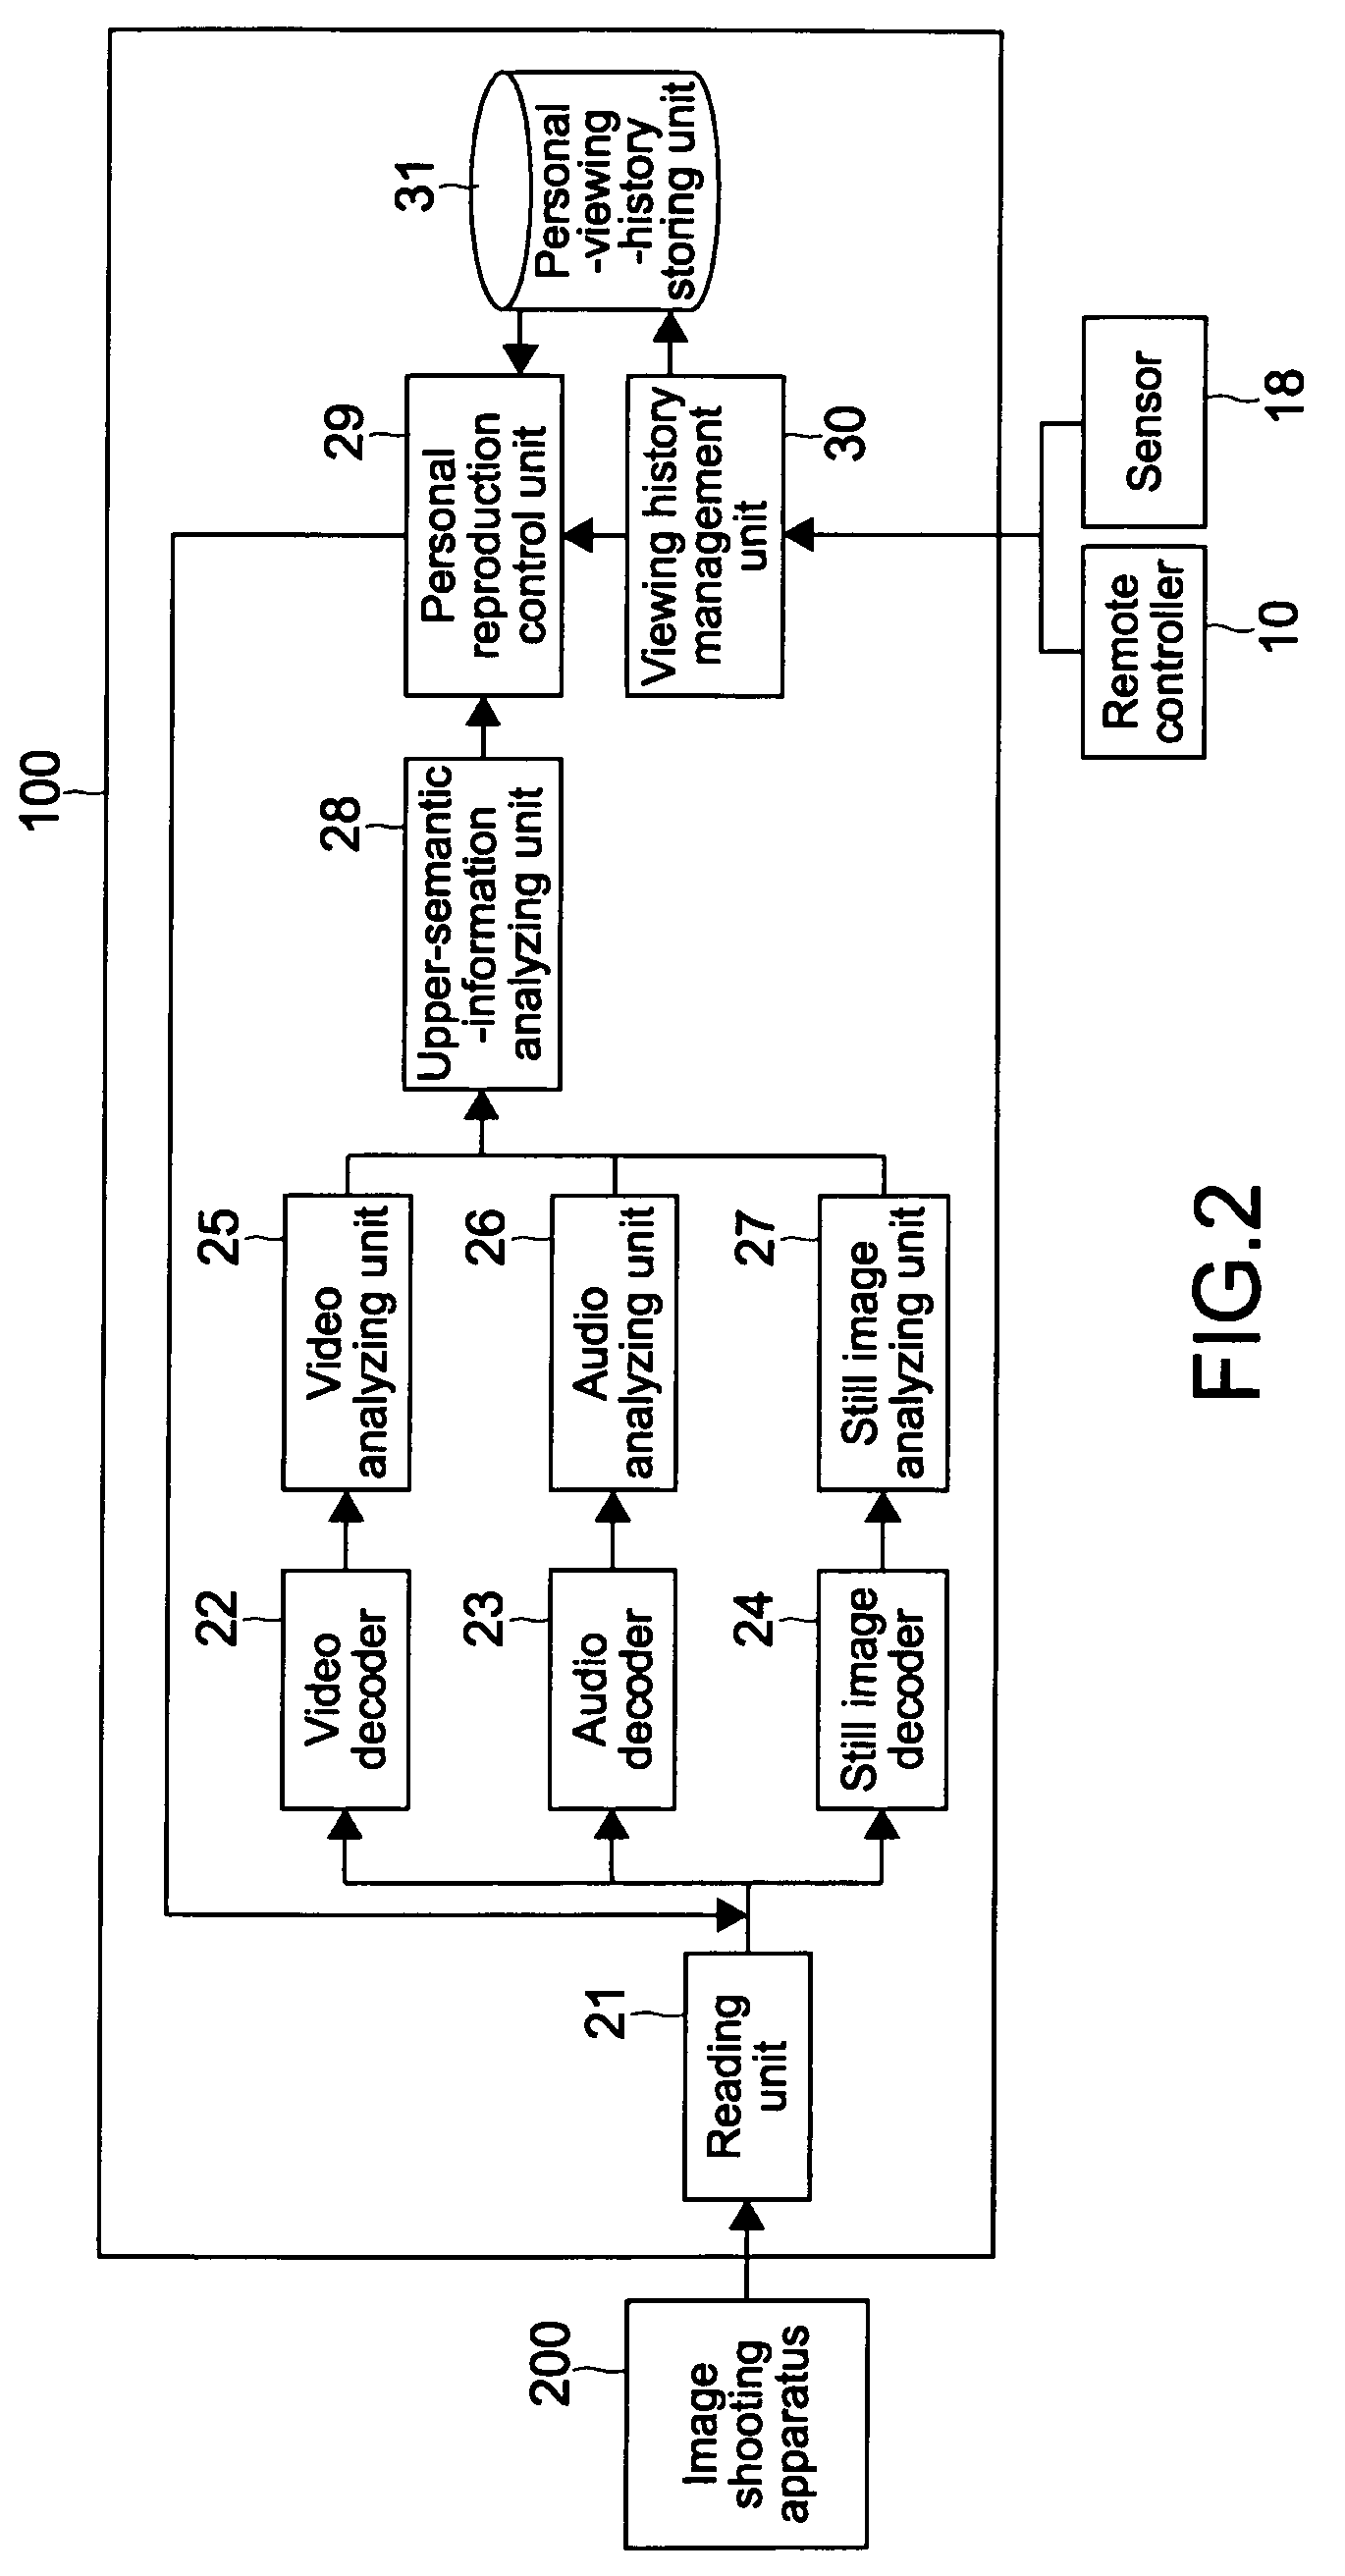 Electronic apparatus, reproduction control system, reproduction control method, and program therefor